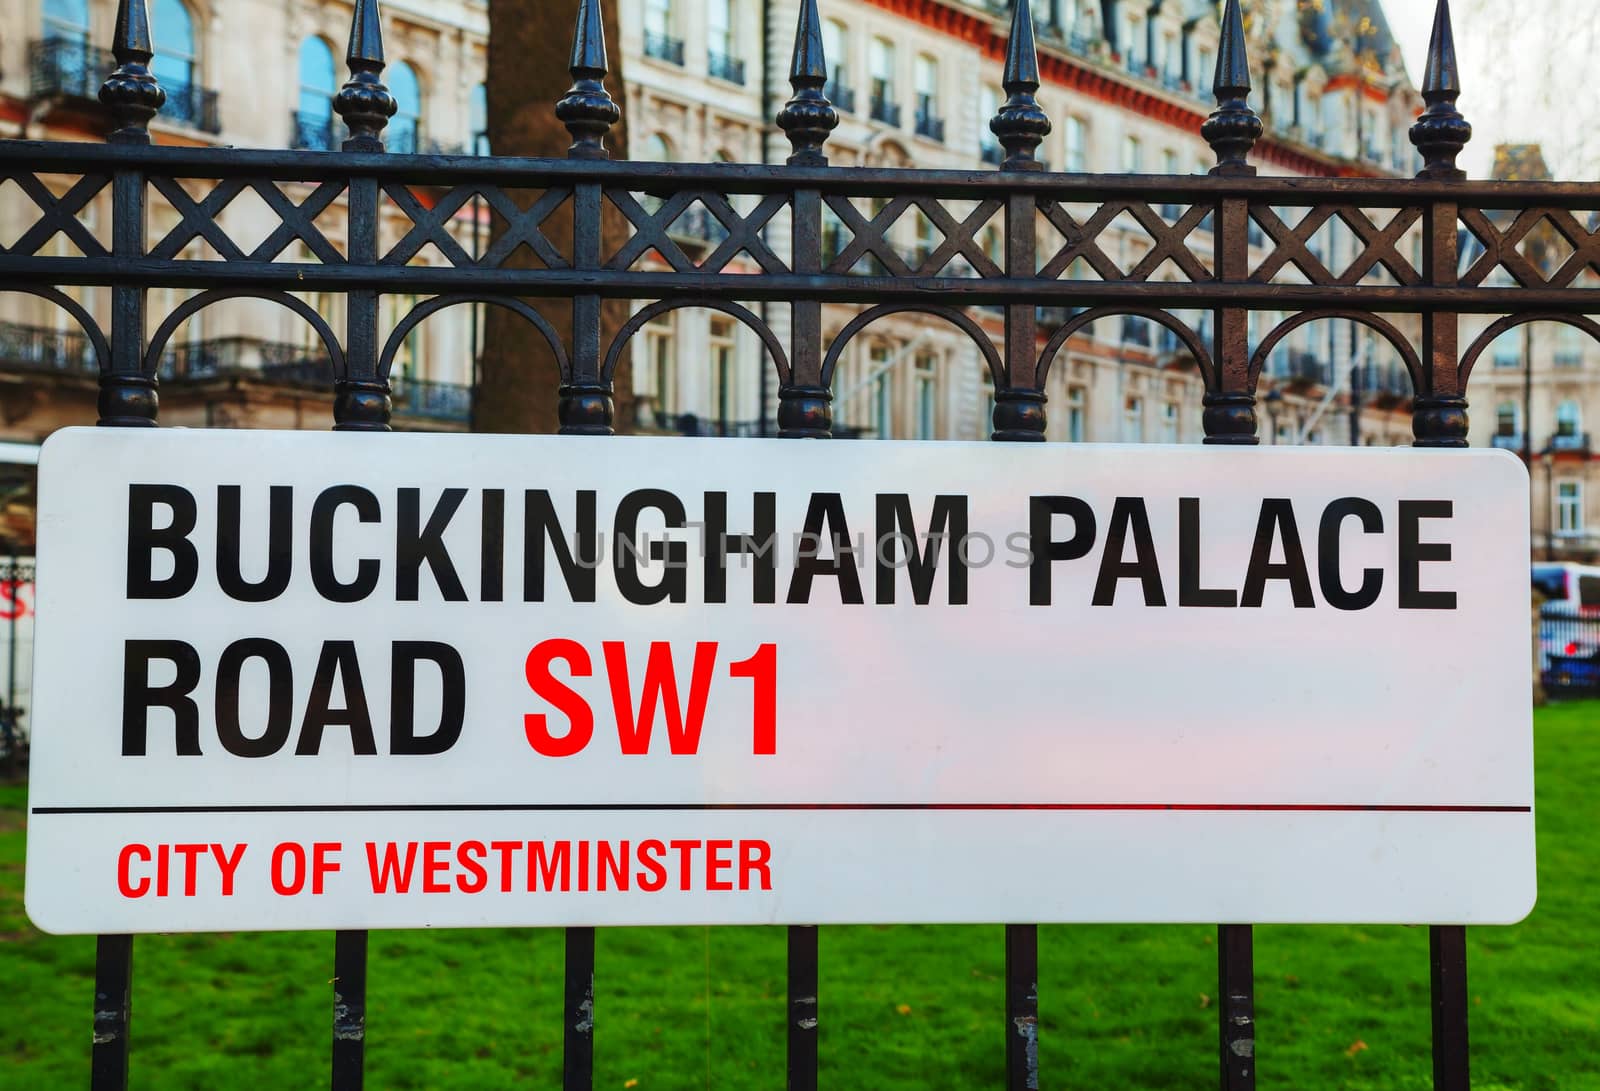 LONDON - APRIL12: Buckingham Palace Road sign on April 12, 2015 in London, UK. It's the London residence and principal workplace of the monarchy of the United Kingdom.